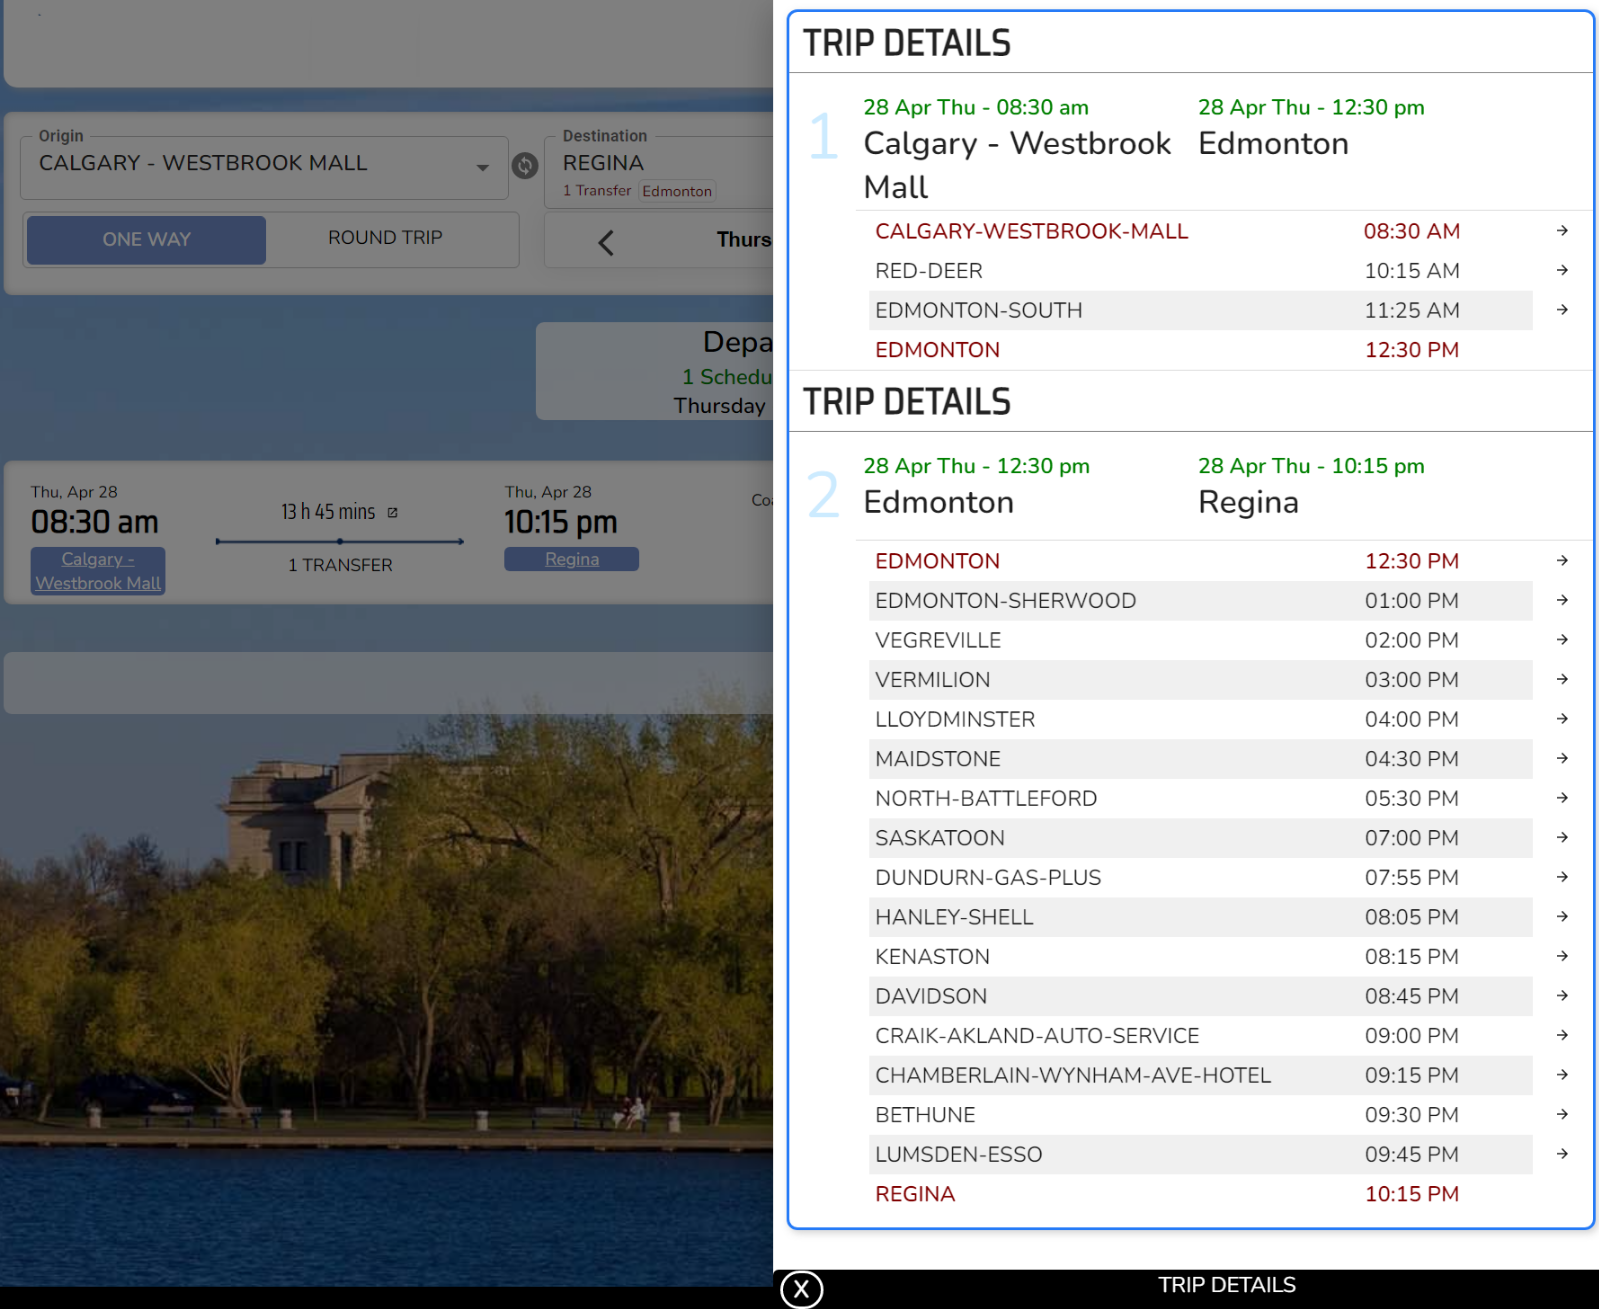 Ticpoi shows the trip details with all connections and all bus stops on the road with the planned schedule. Customers can see all the details with bus date, time and schedule. They can fell safer by finding detailed information.